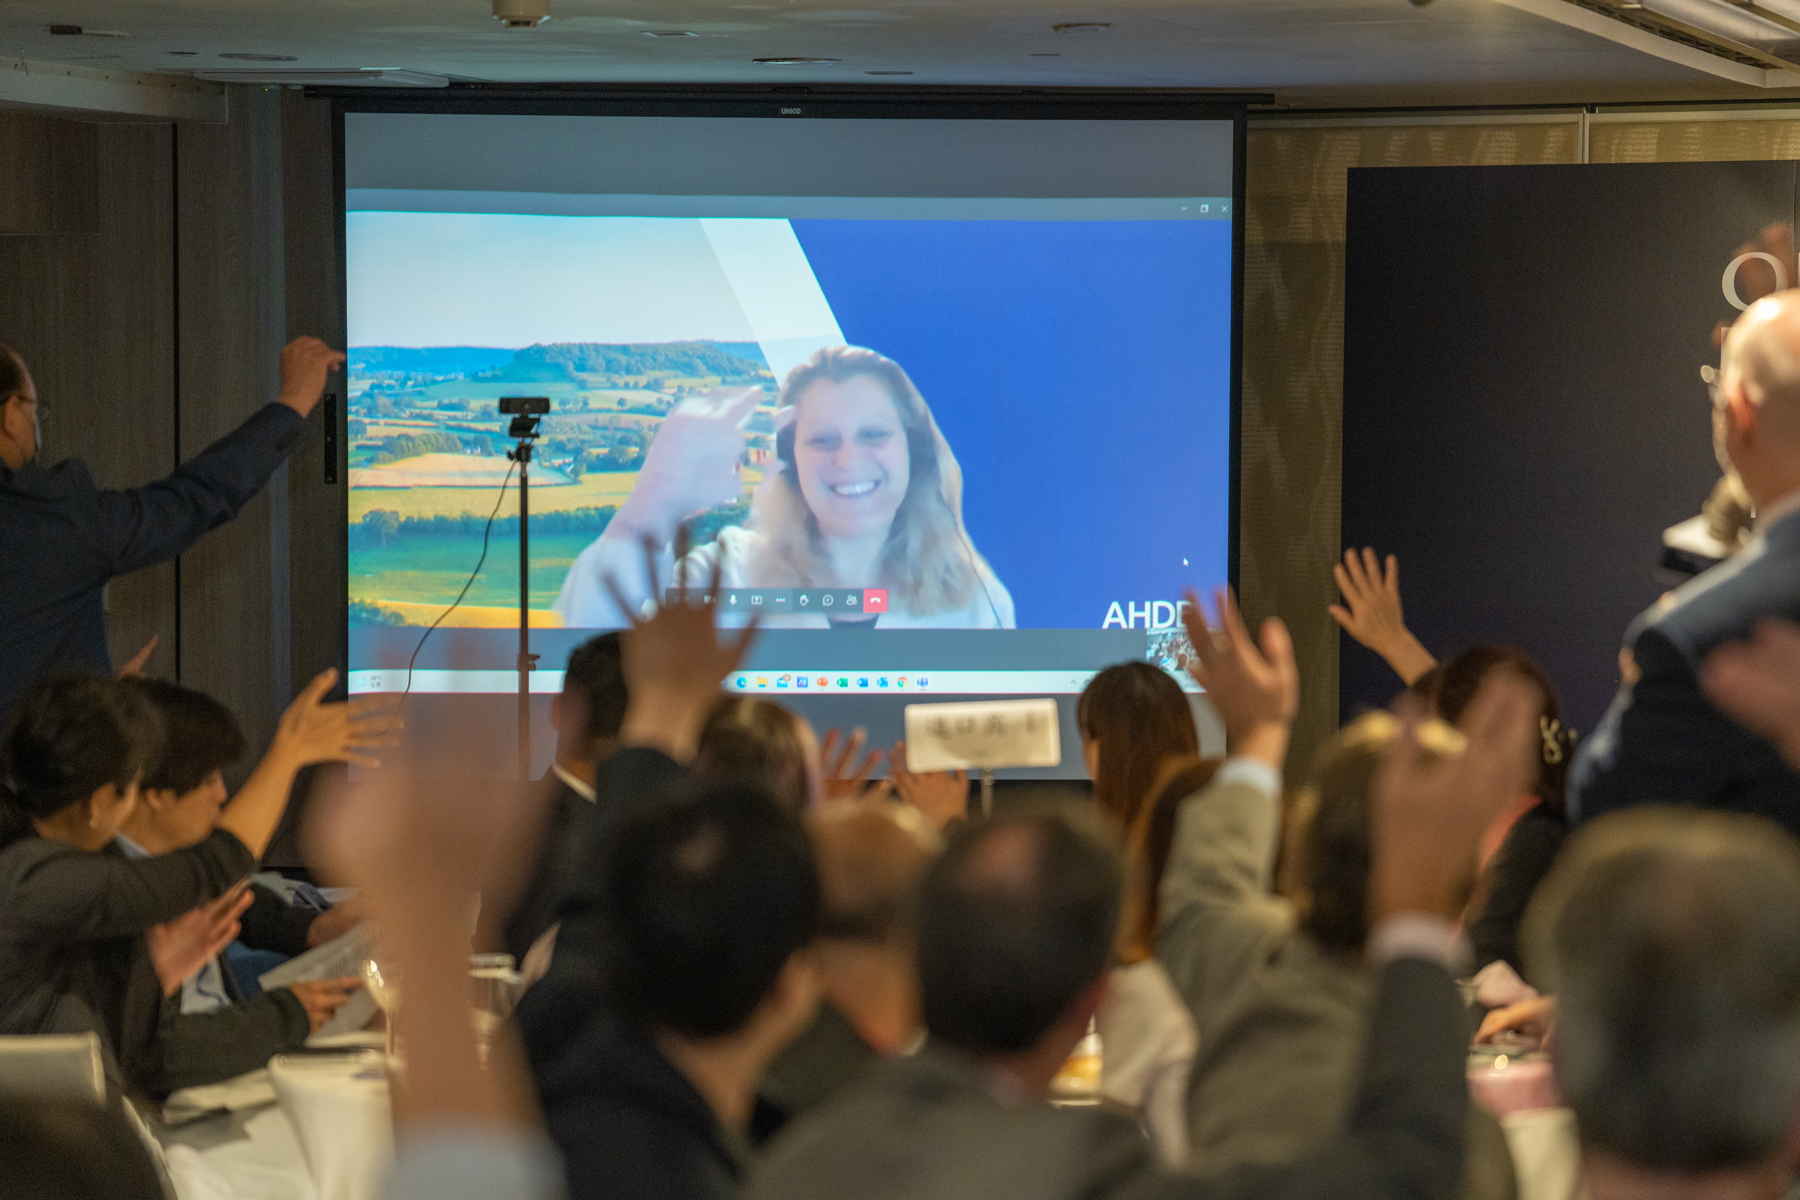 Susan Stewart, ADHB’s senior export manager for the Asia-Pacific, introducing British pork farming to the guests through a live broadcast connection, and conveyed her best wishes and bon appétit to everyone